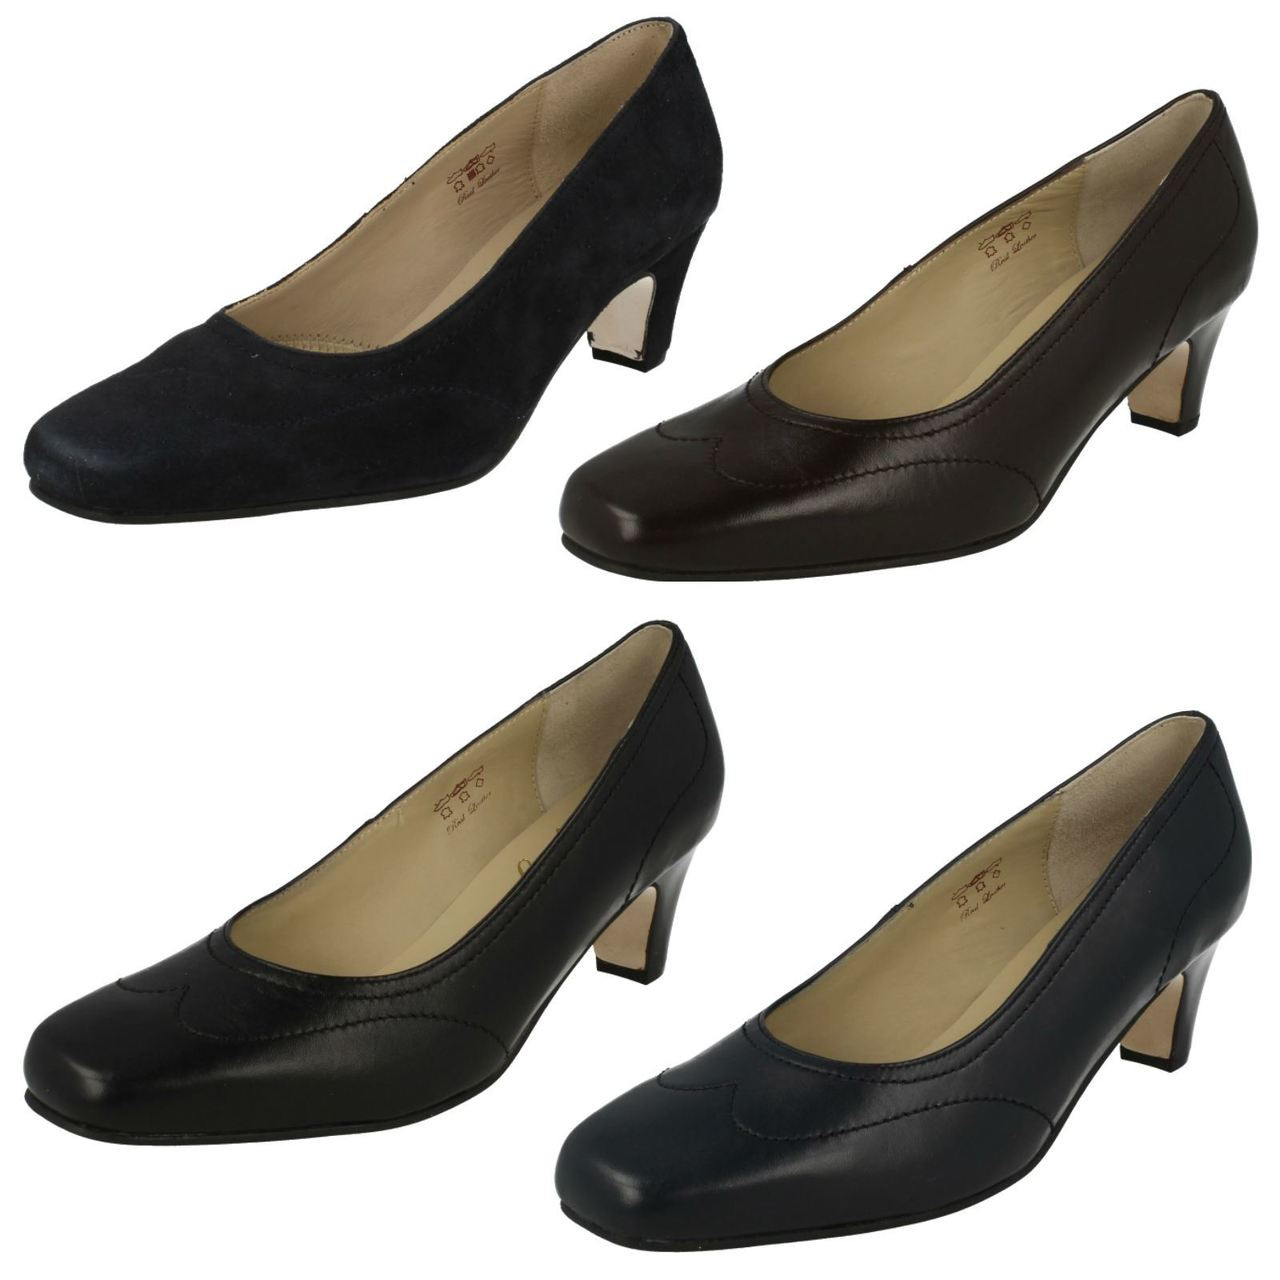 wide fitting court shoes